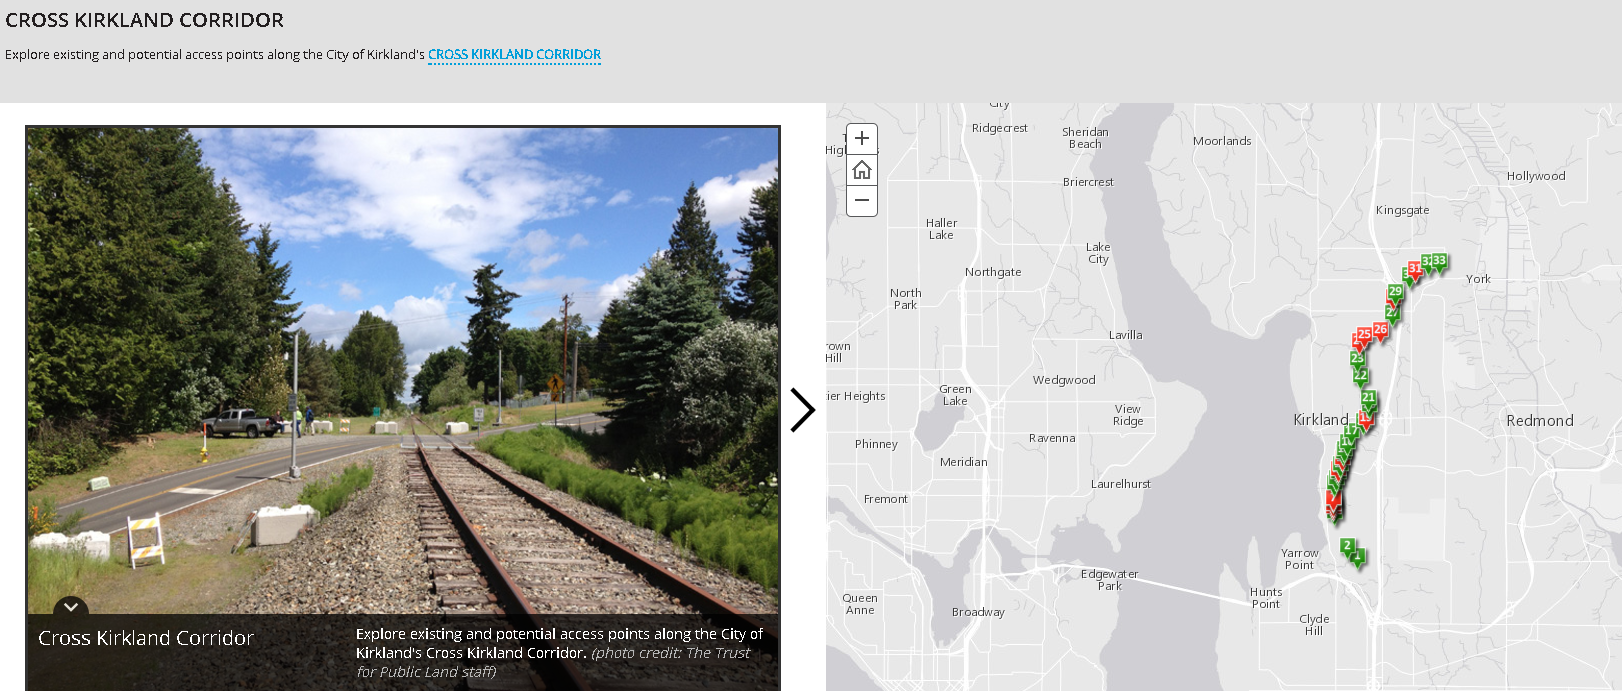 A story map of the Cross Kirkland Corridor showing current and potential access points.